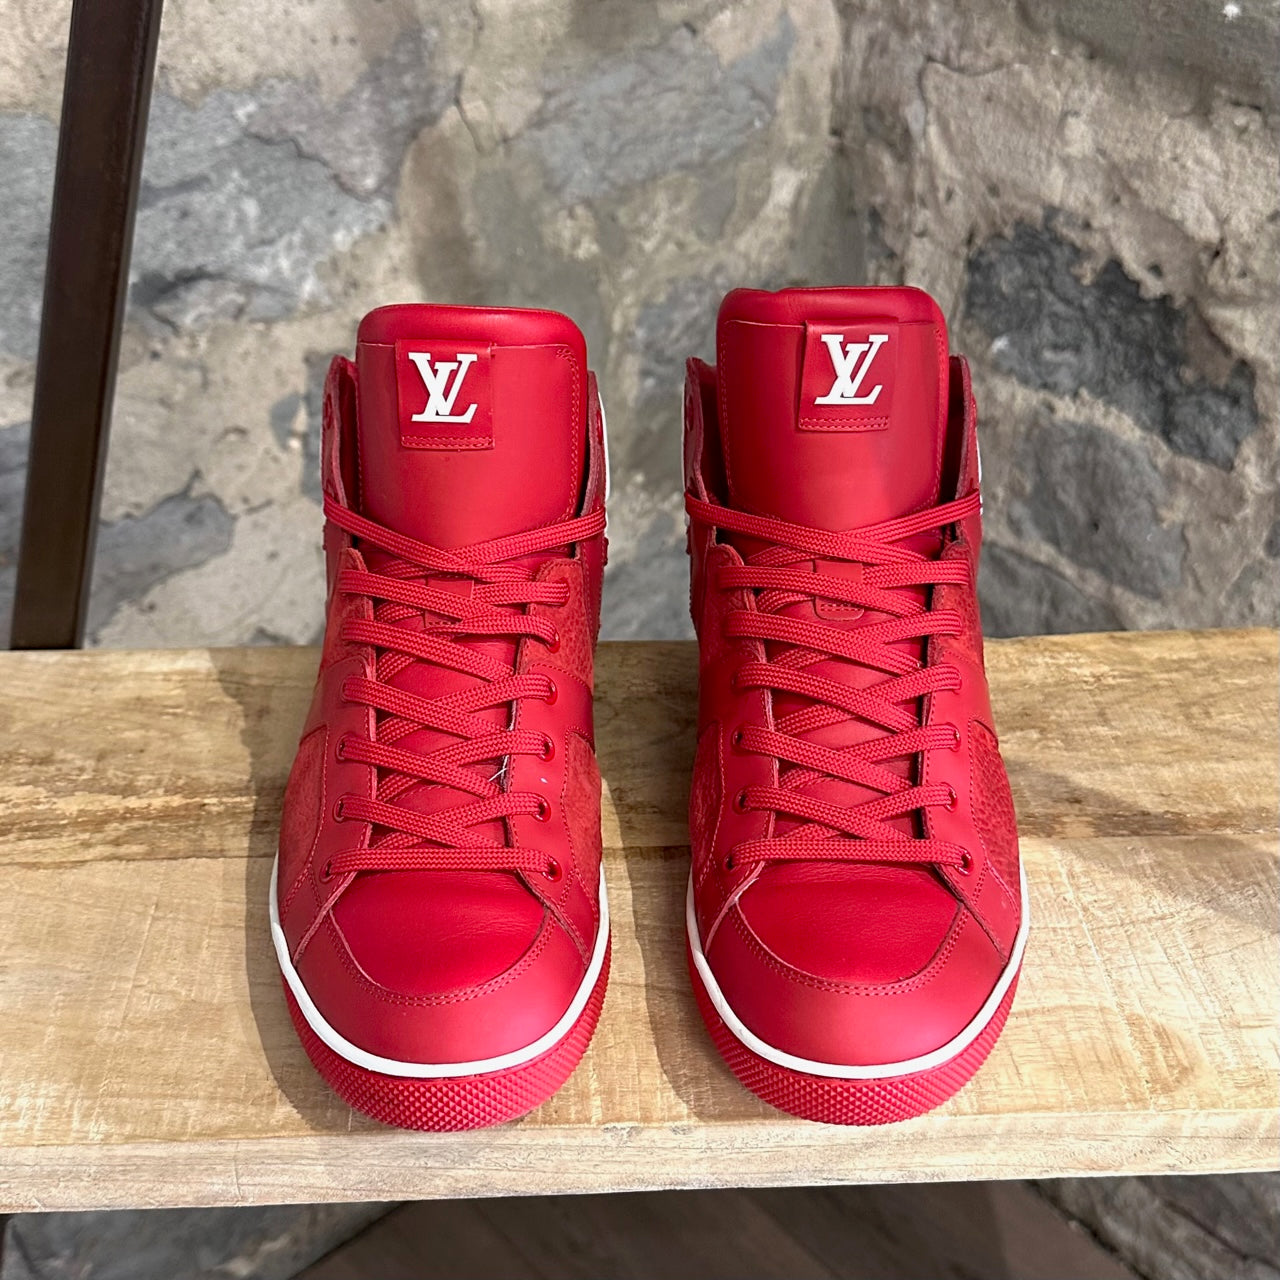 LOUIS VUITTON A/W 2012 Heroes Red Suede and Leather High Top